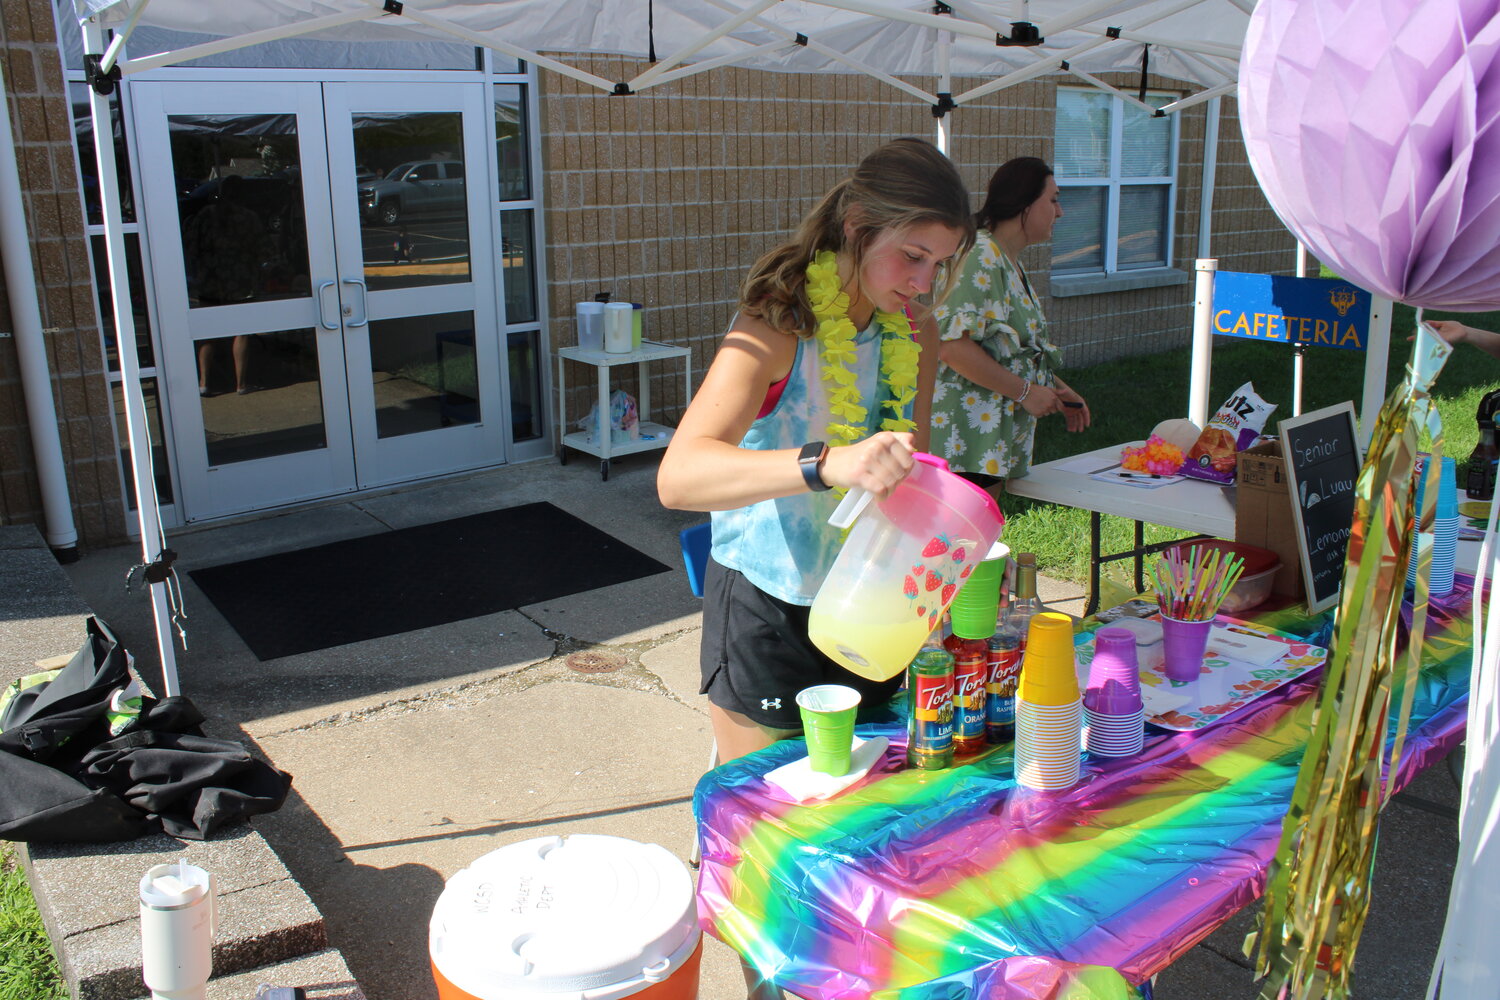 Sam Finch was helping run the lemonade stand that provided free drinks for the students who were out with their designs. The lemonade was provided by the class as a whole so no one had to pay for it.